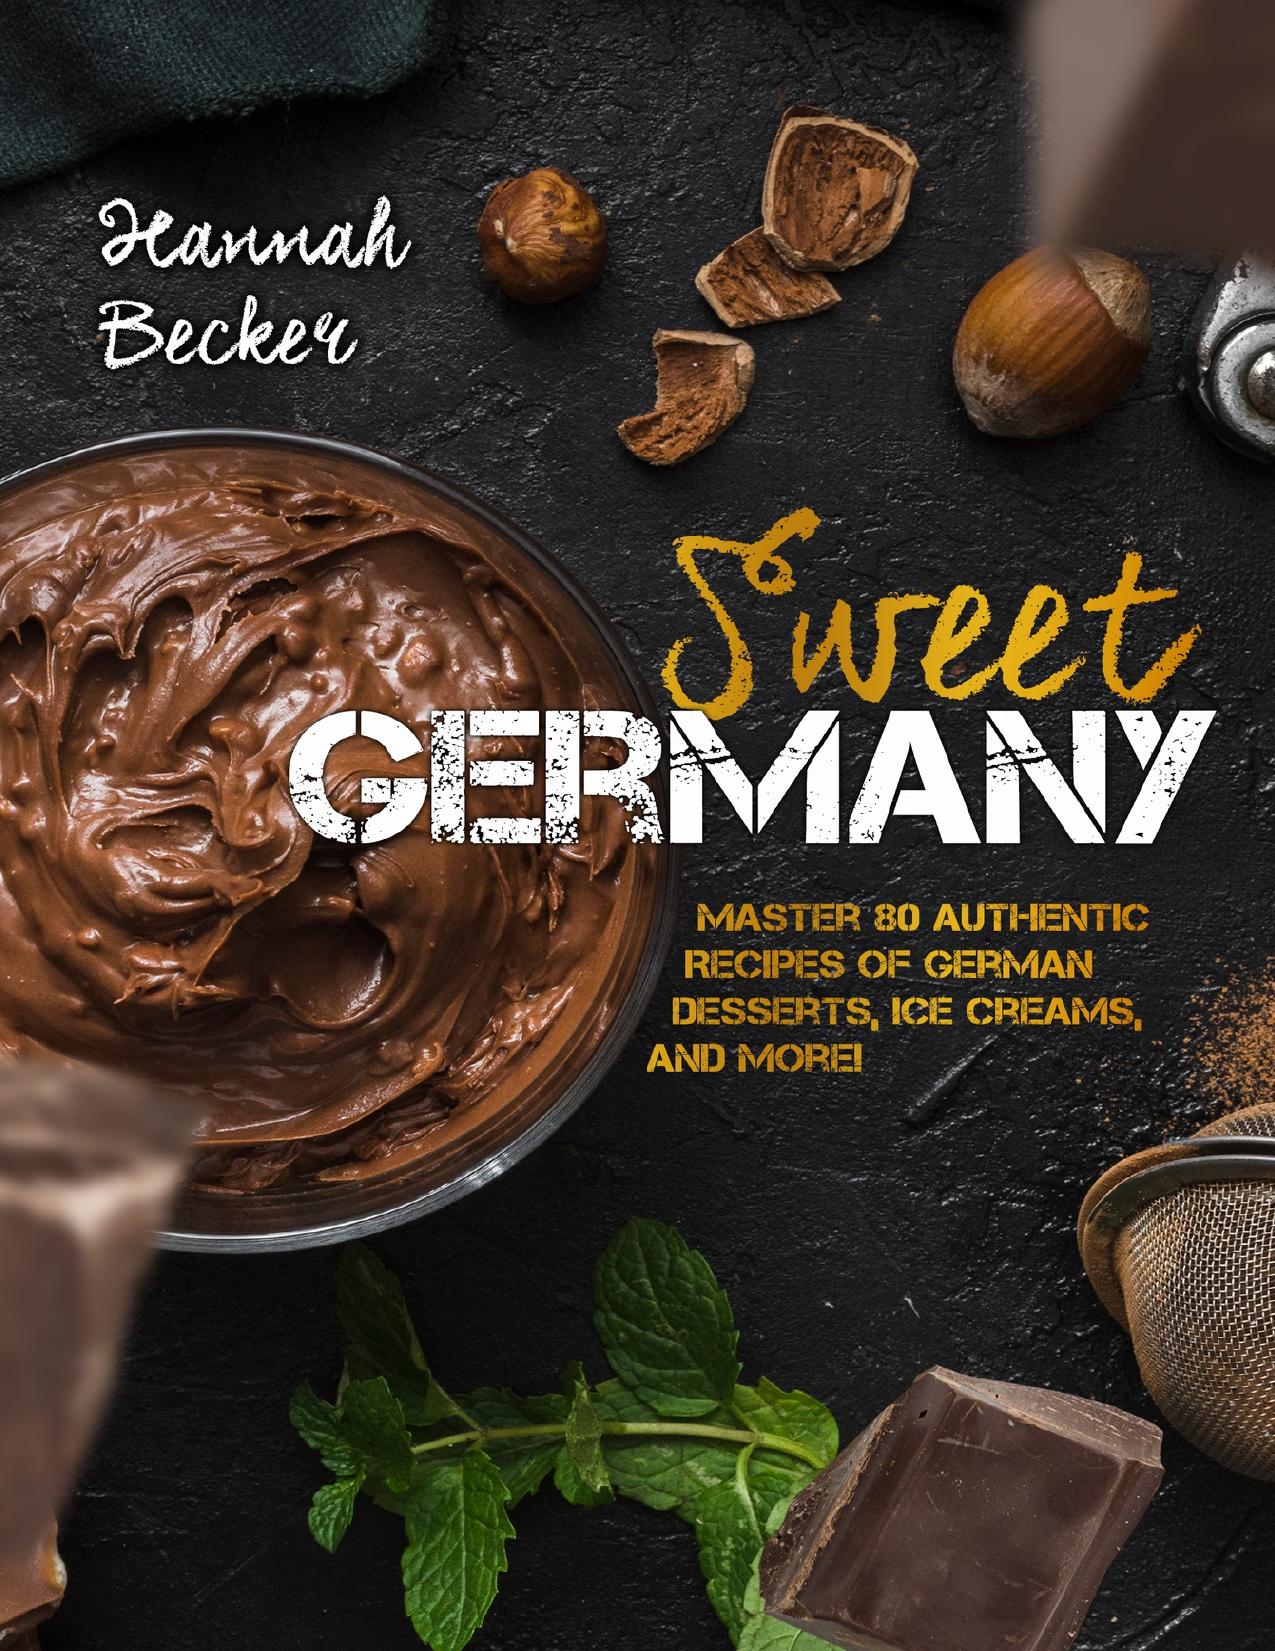 Sweet Germany: Master 80 Authentic Recipes of German Desserts, Ice Creams, and More! (German Cookbook) by Becker Hannah